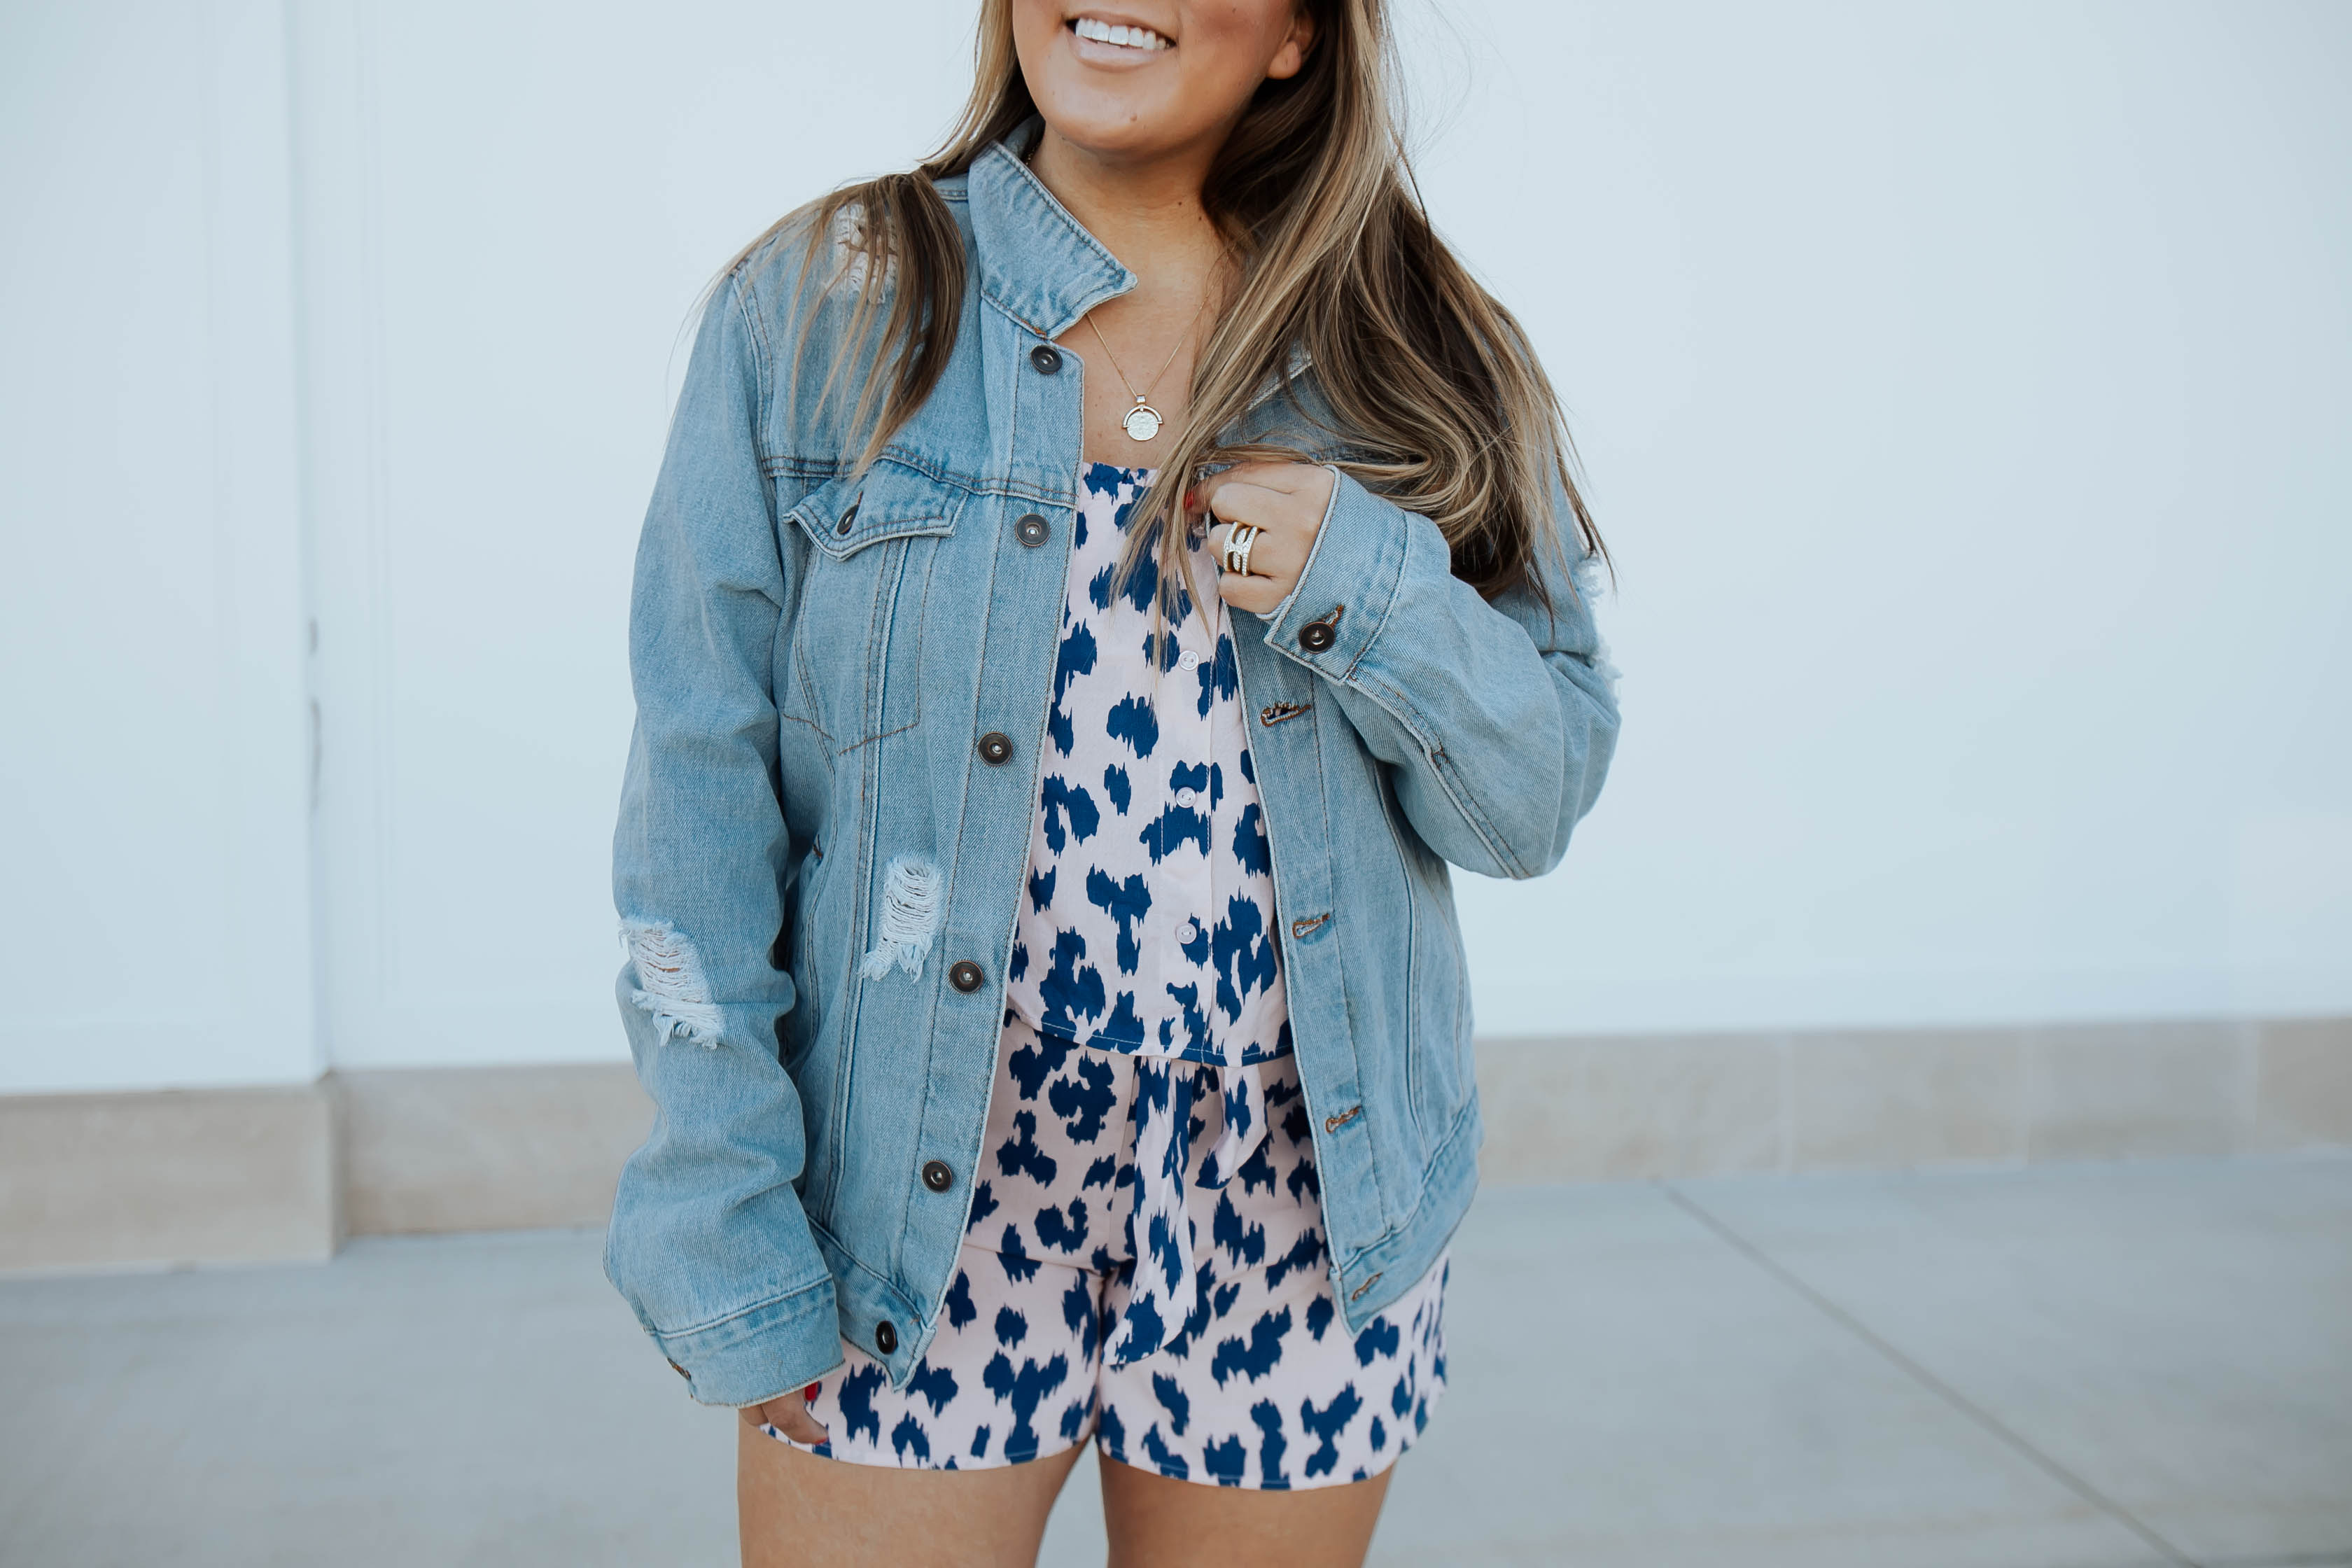 San Francisco blogger, Ashley Zeal, from Two Peas in a Prada shares her June 2019 best sellers. See all the best selling items from last month.